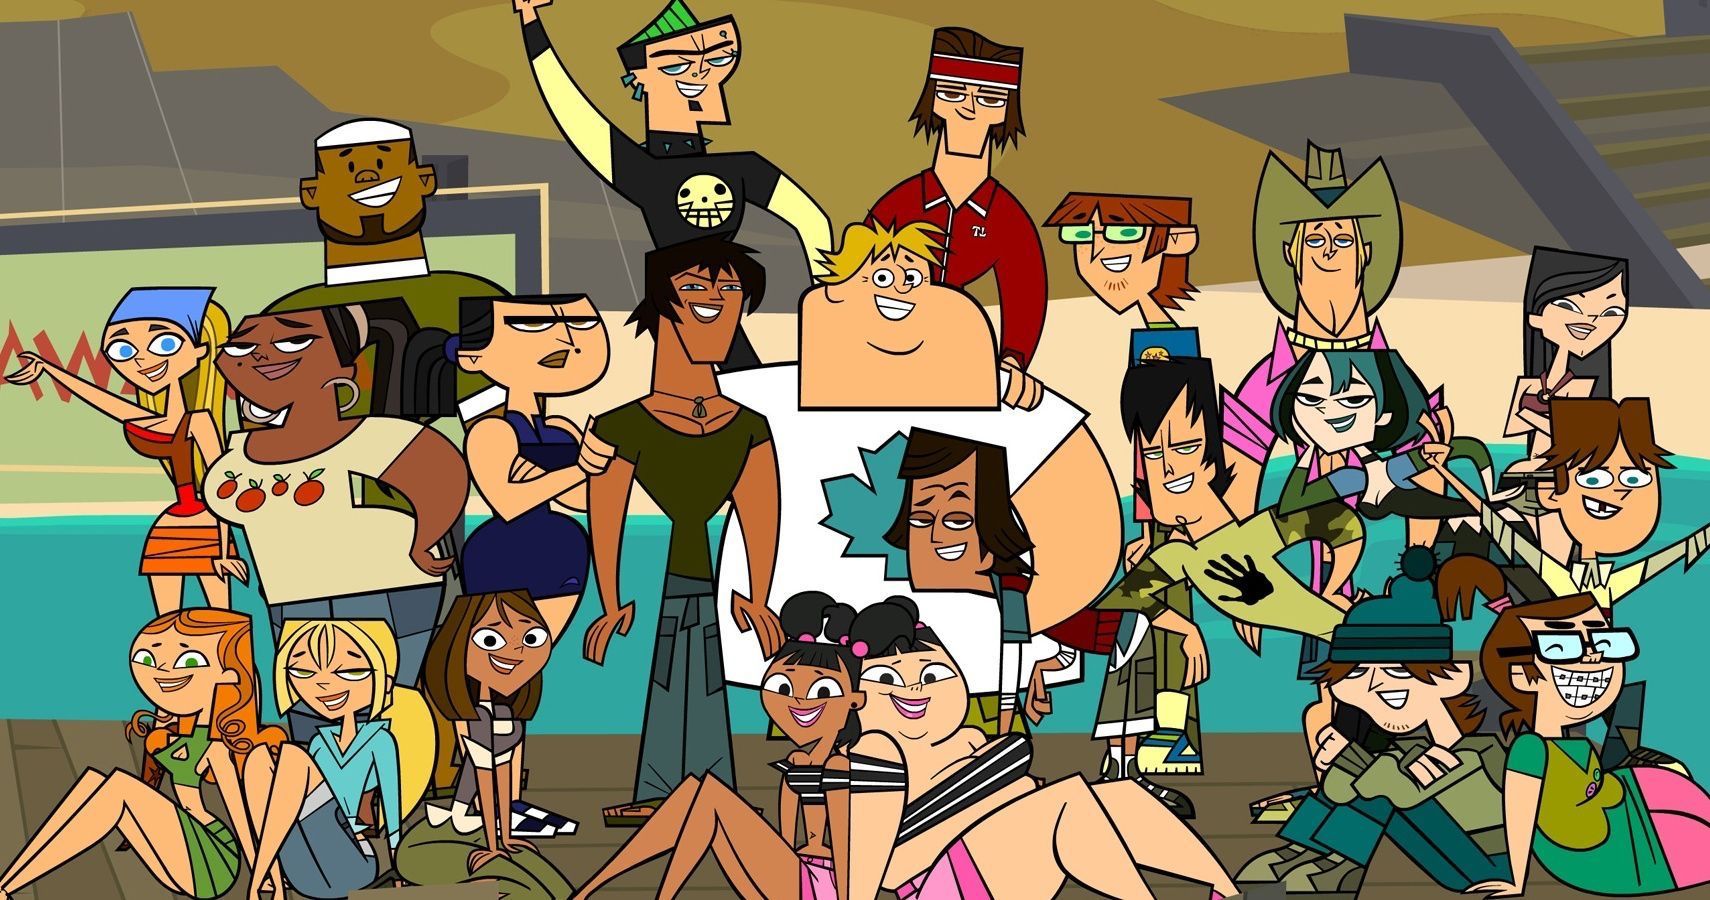 Fans Are Excited For Cartoon Network's 'Total Drama Island' Revival